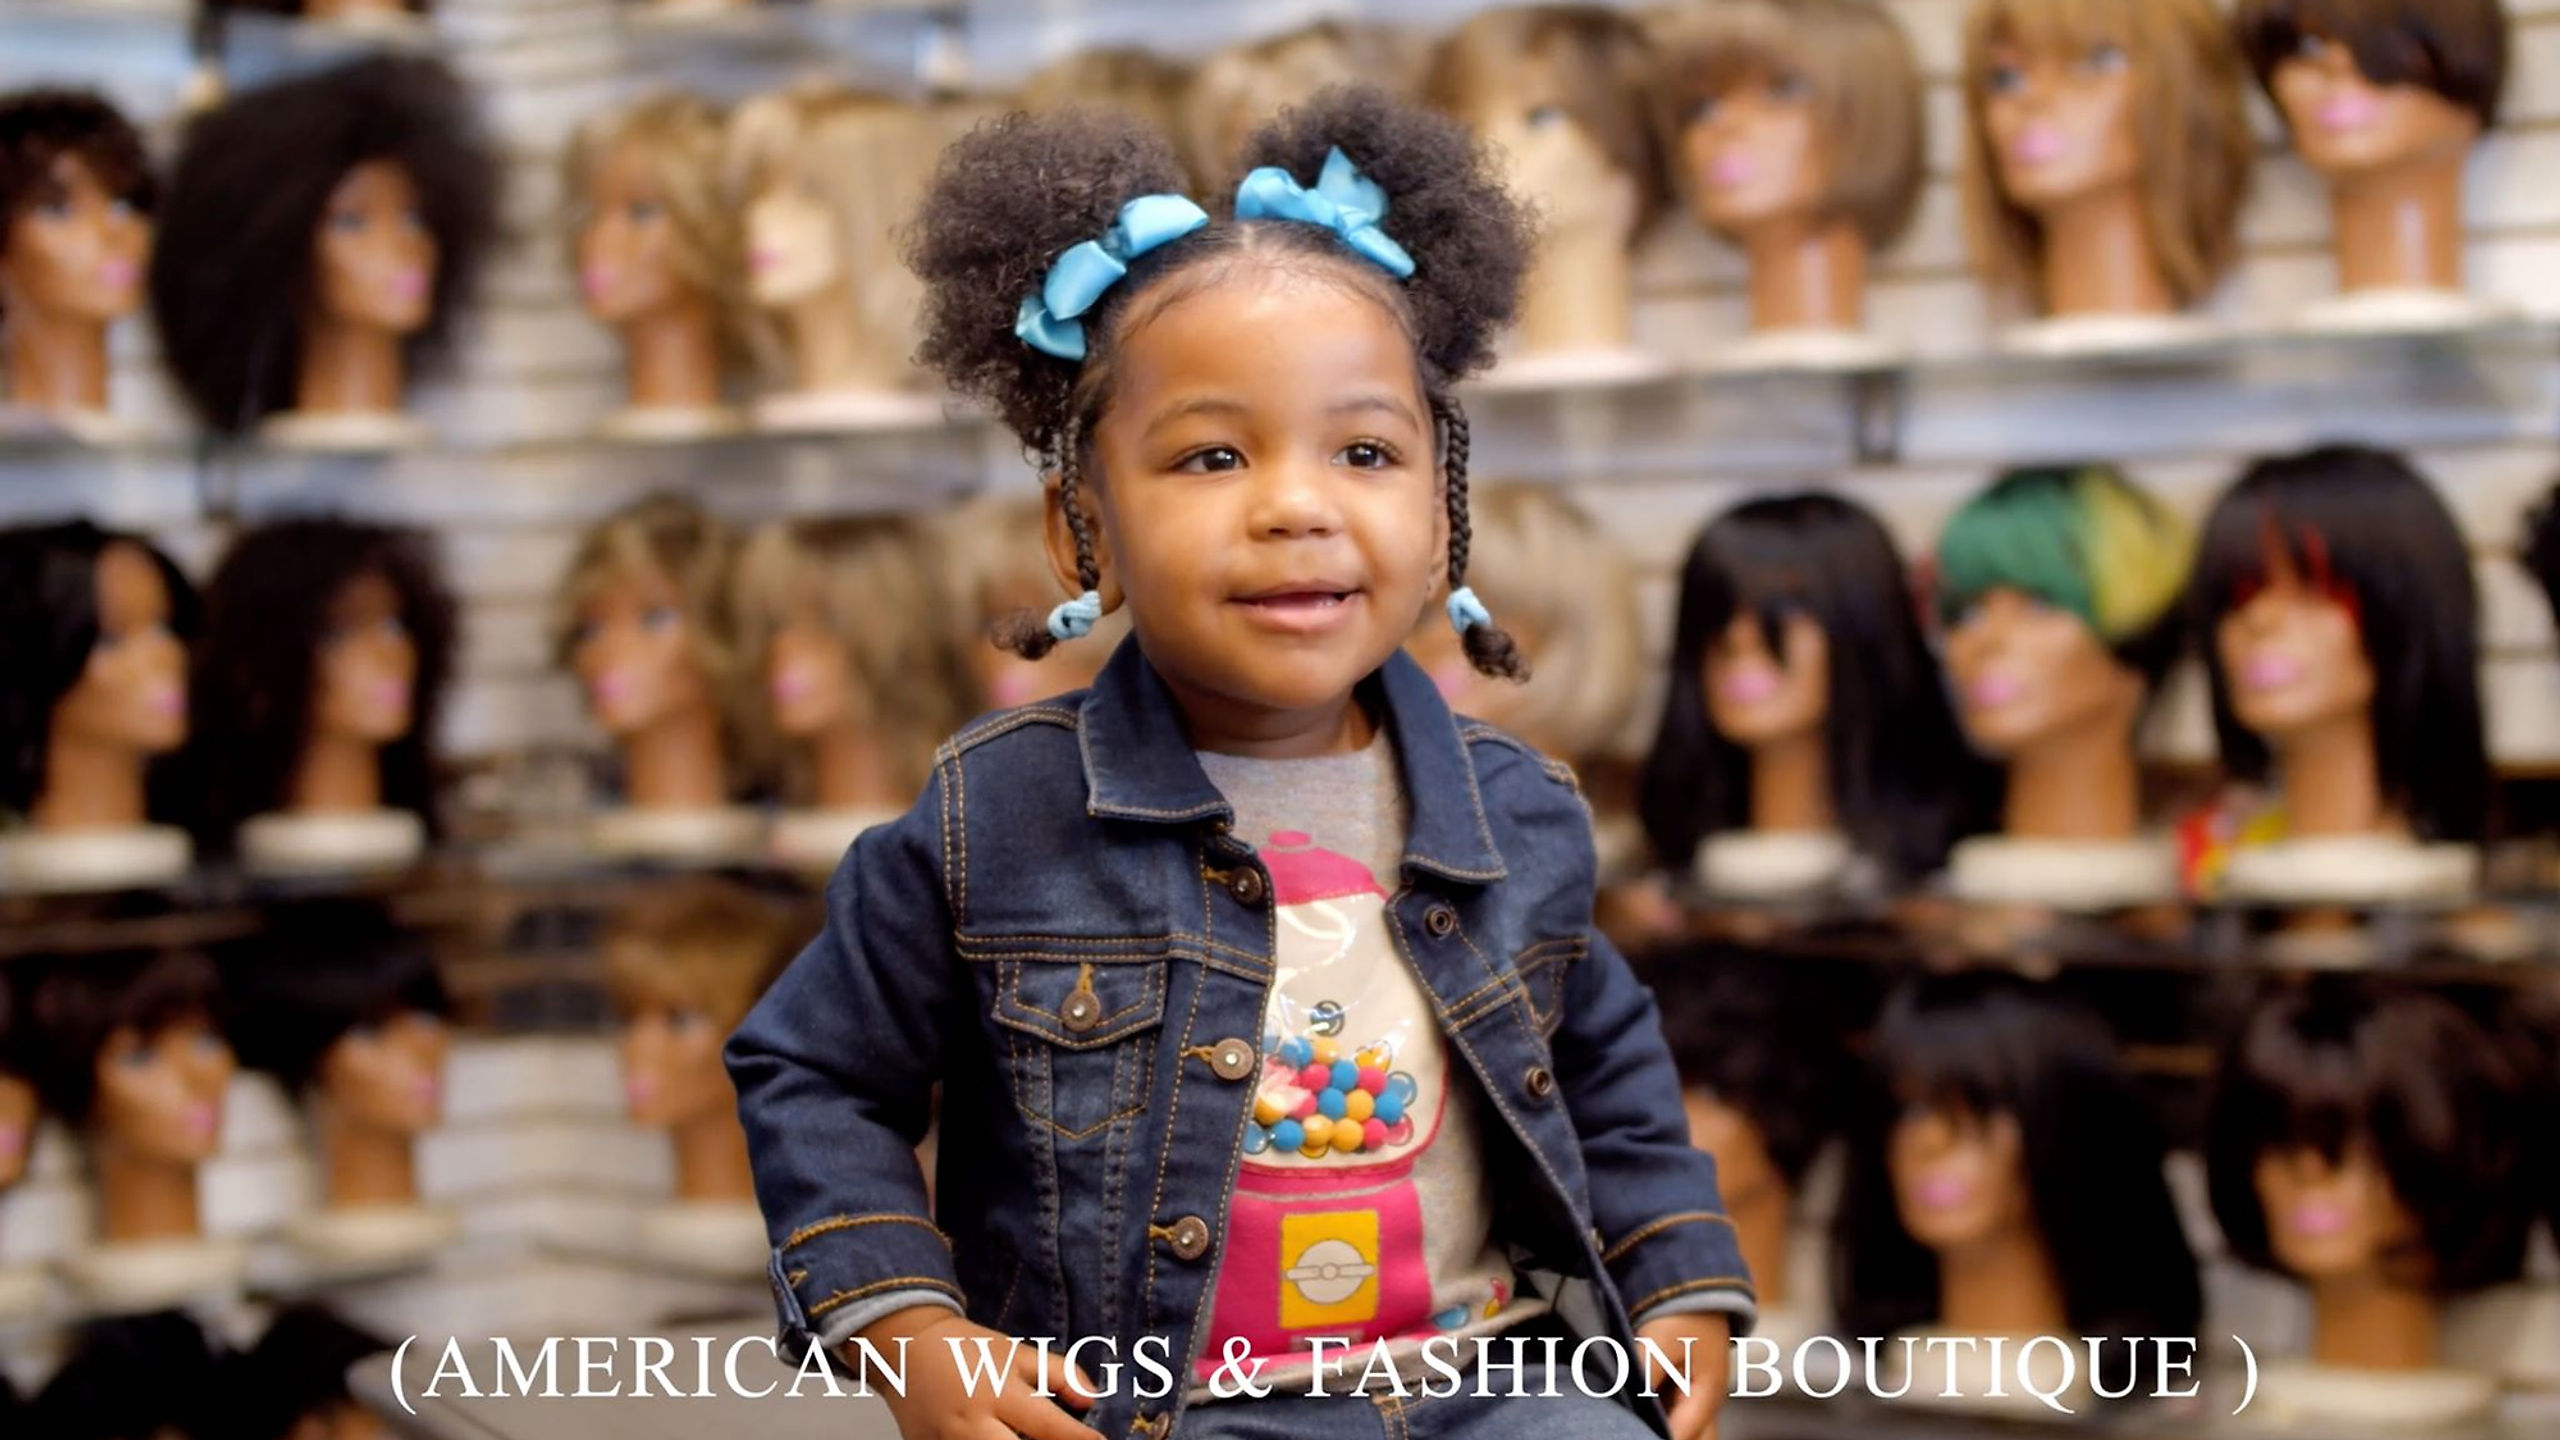 American Wigs & Fashion 15 Year Anniversary Commercial